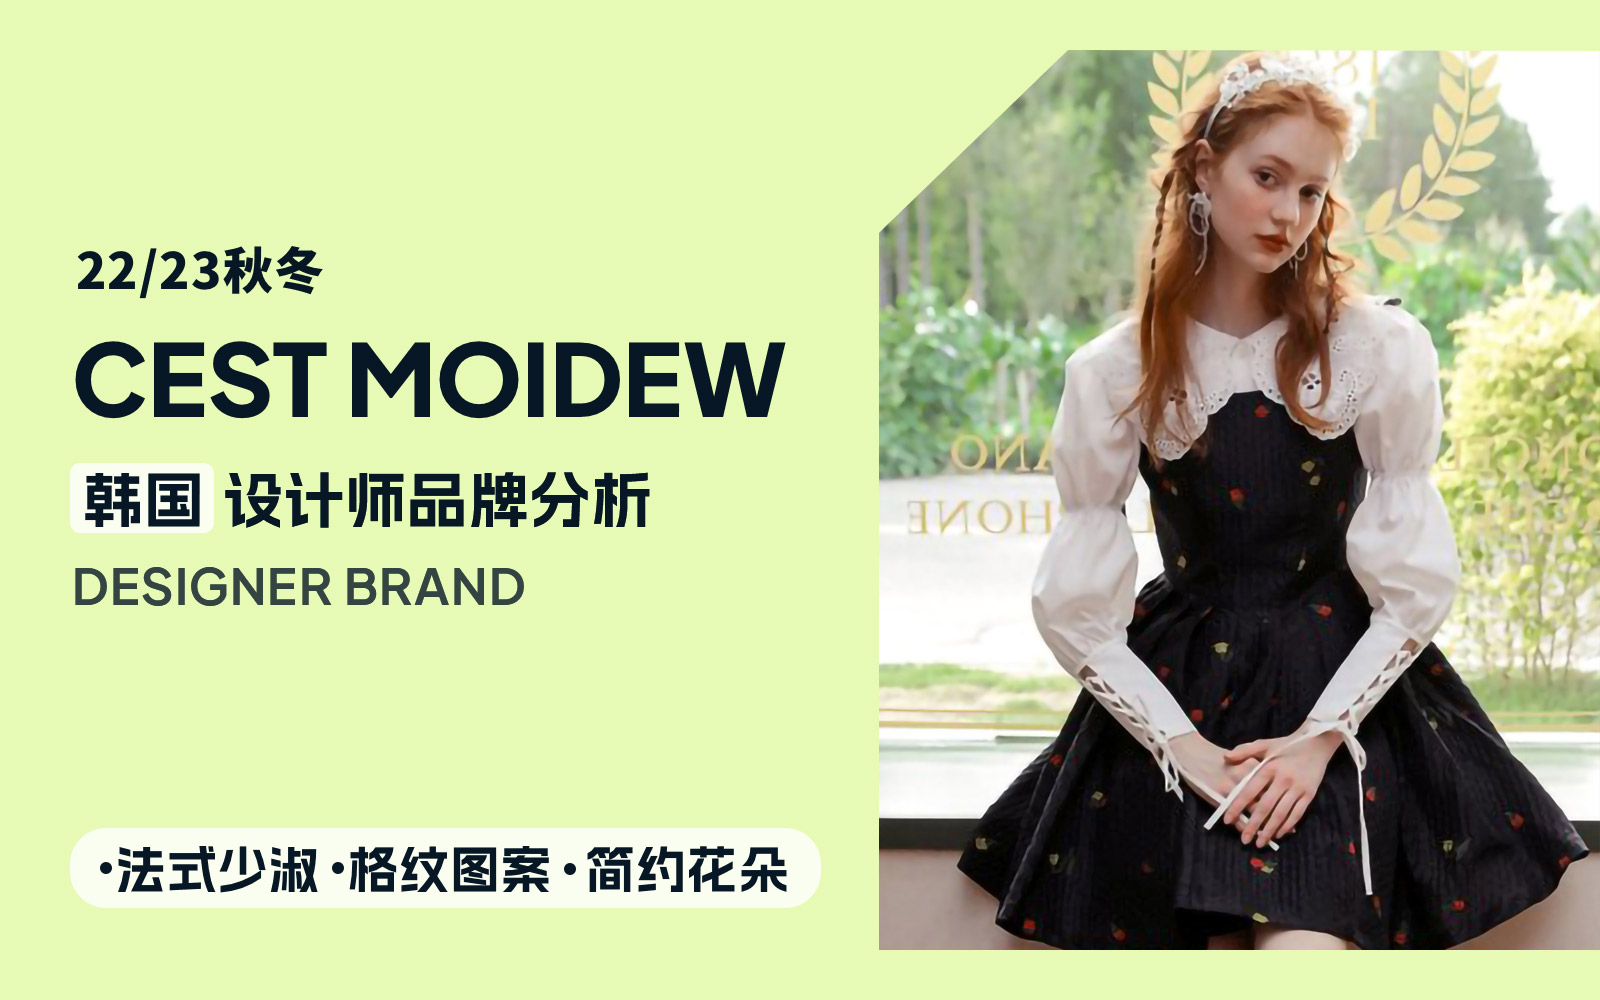 French-style Lady -- The Analysis of Cest Moidew The Womenswear Designer Brand